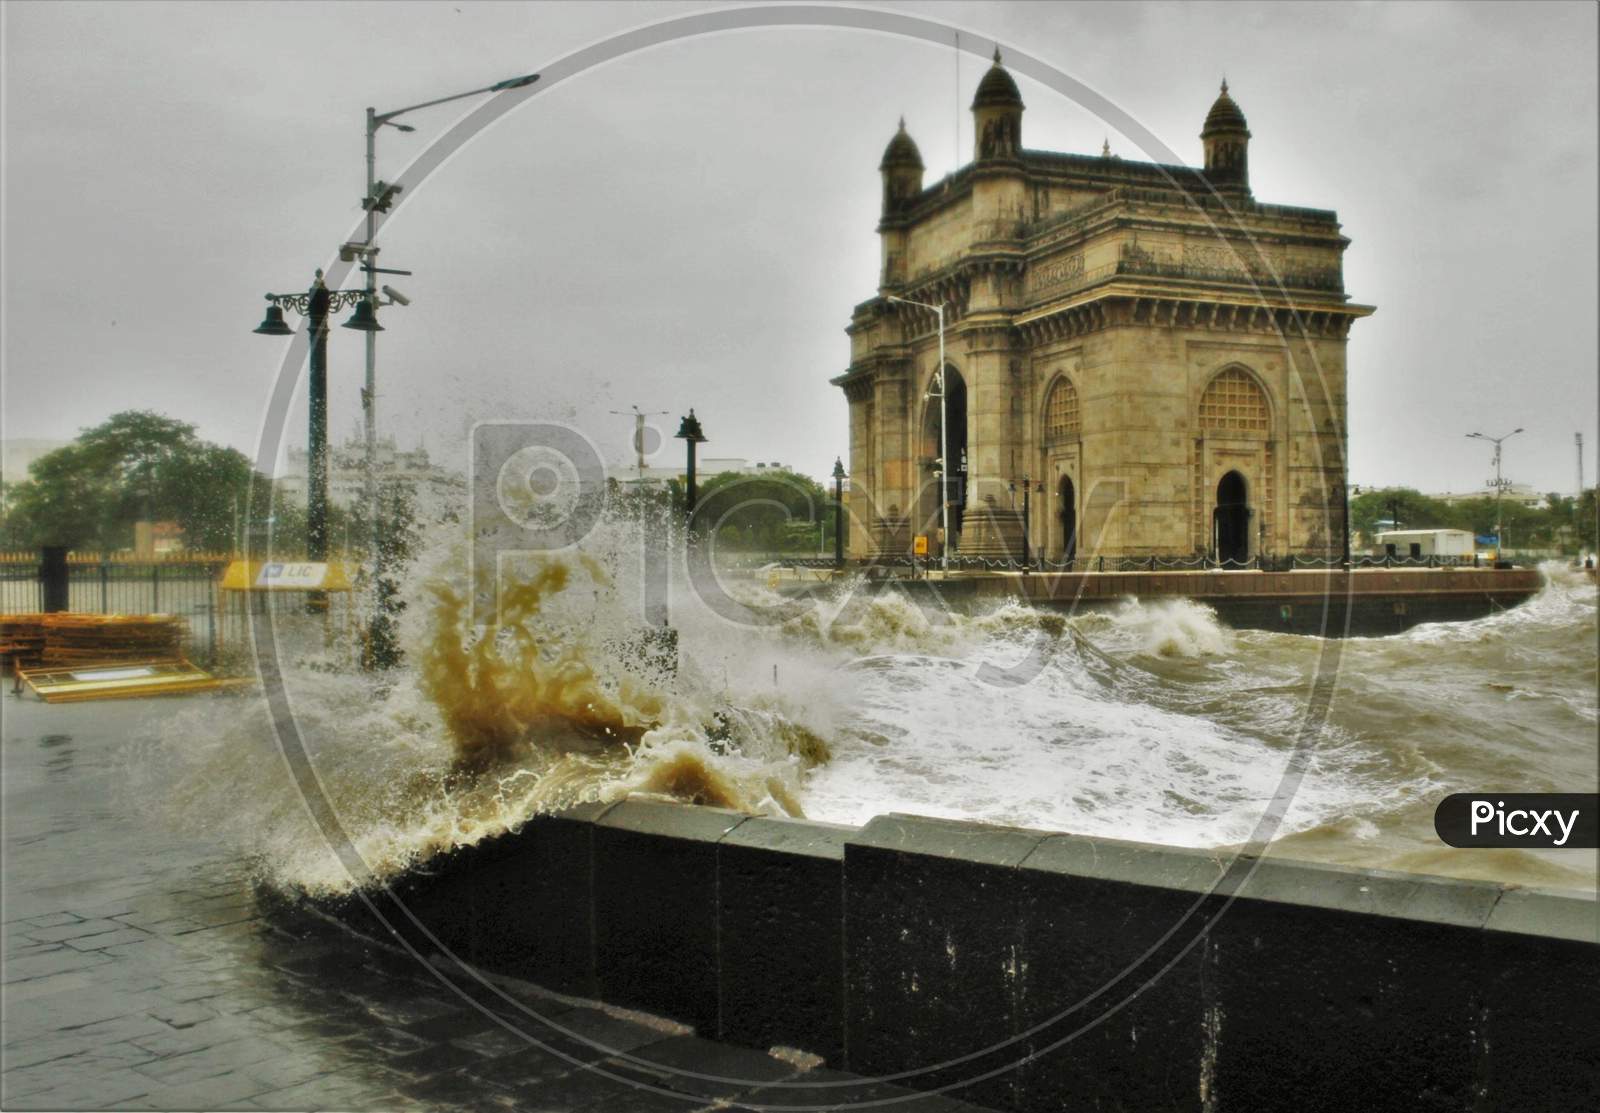 Waves crash at the Gateway of India during high tide in Mumbai, India on July 6, 2020.